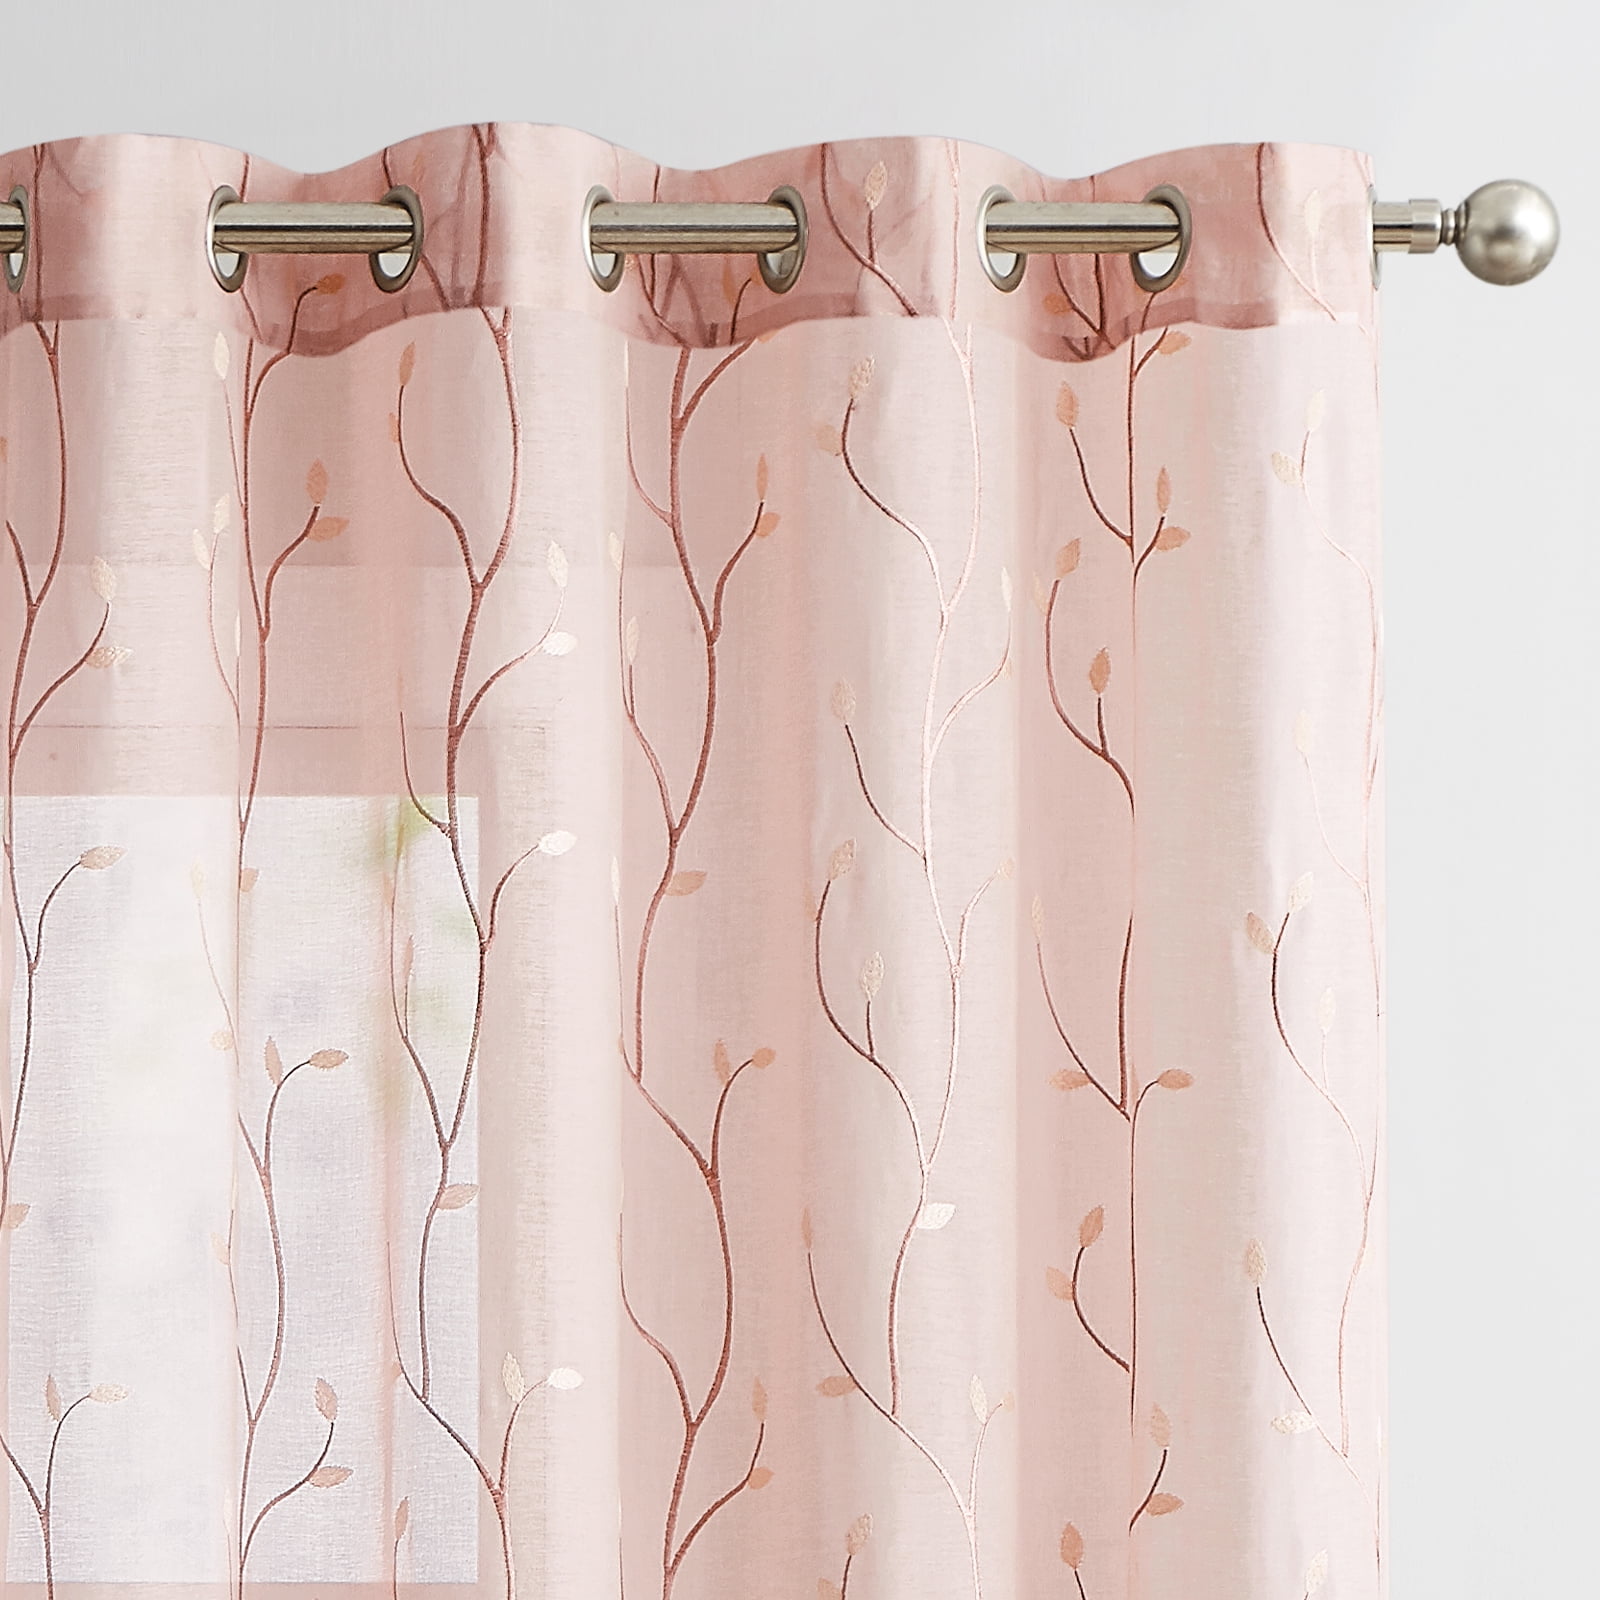 Buy Set of 2 Pink Embroidery Curtain with 8 Silver Grommets at ShopLC.